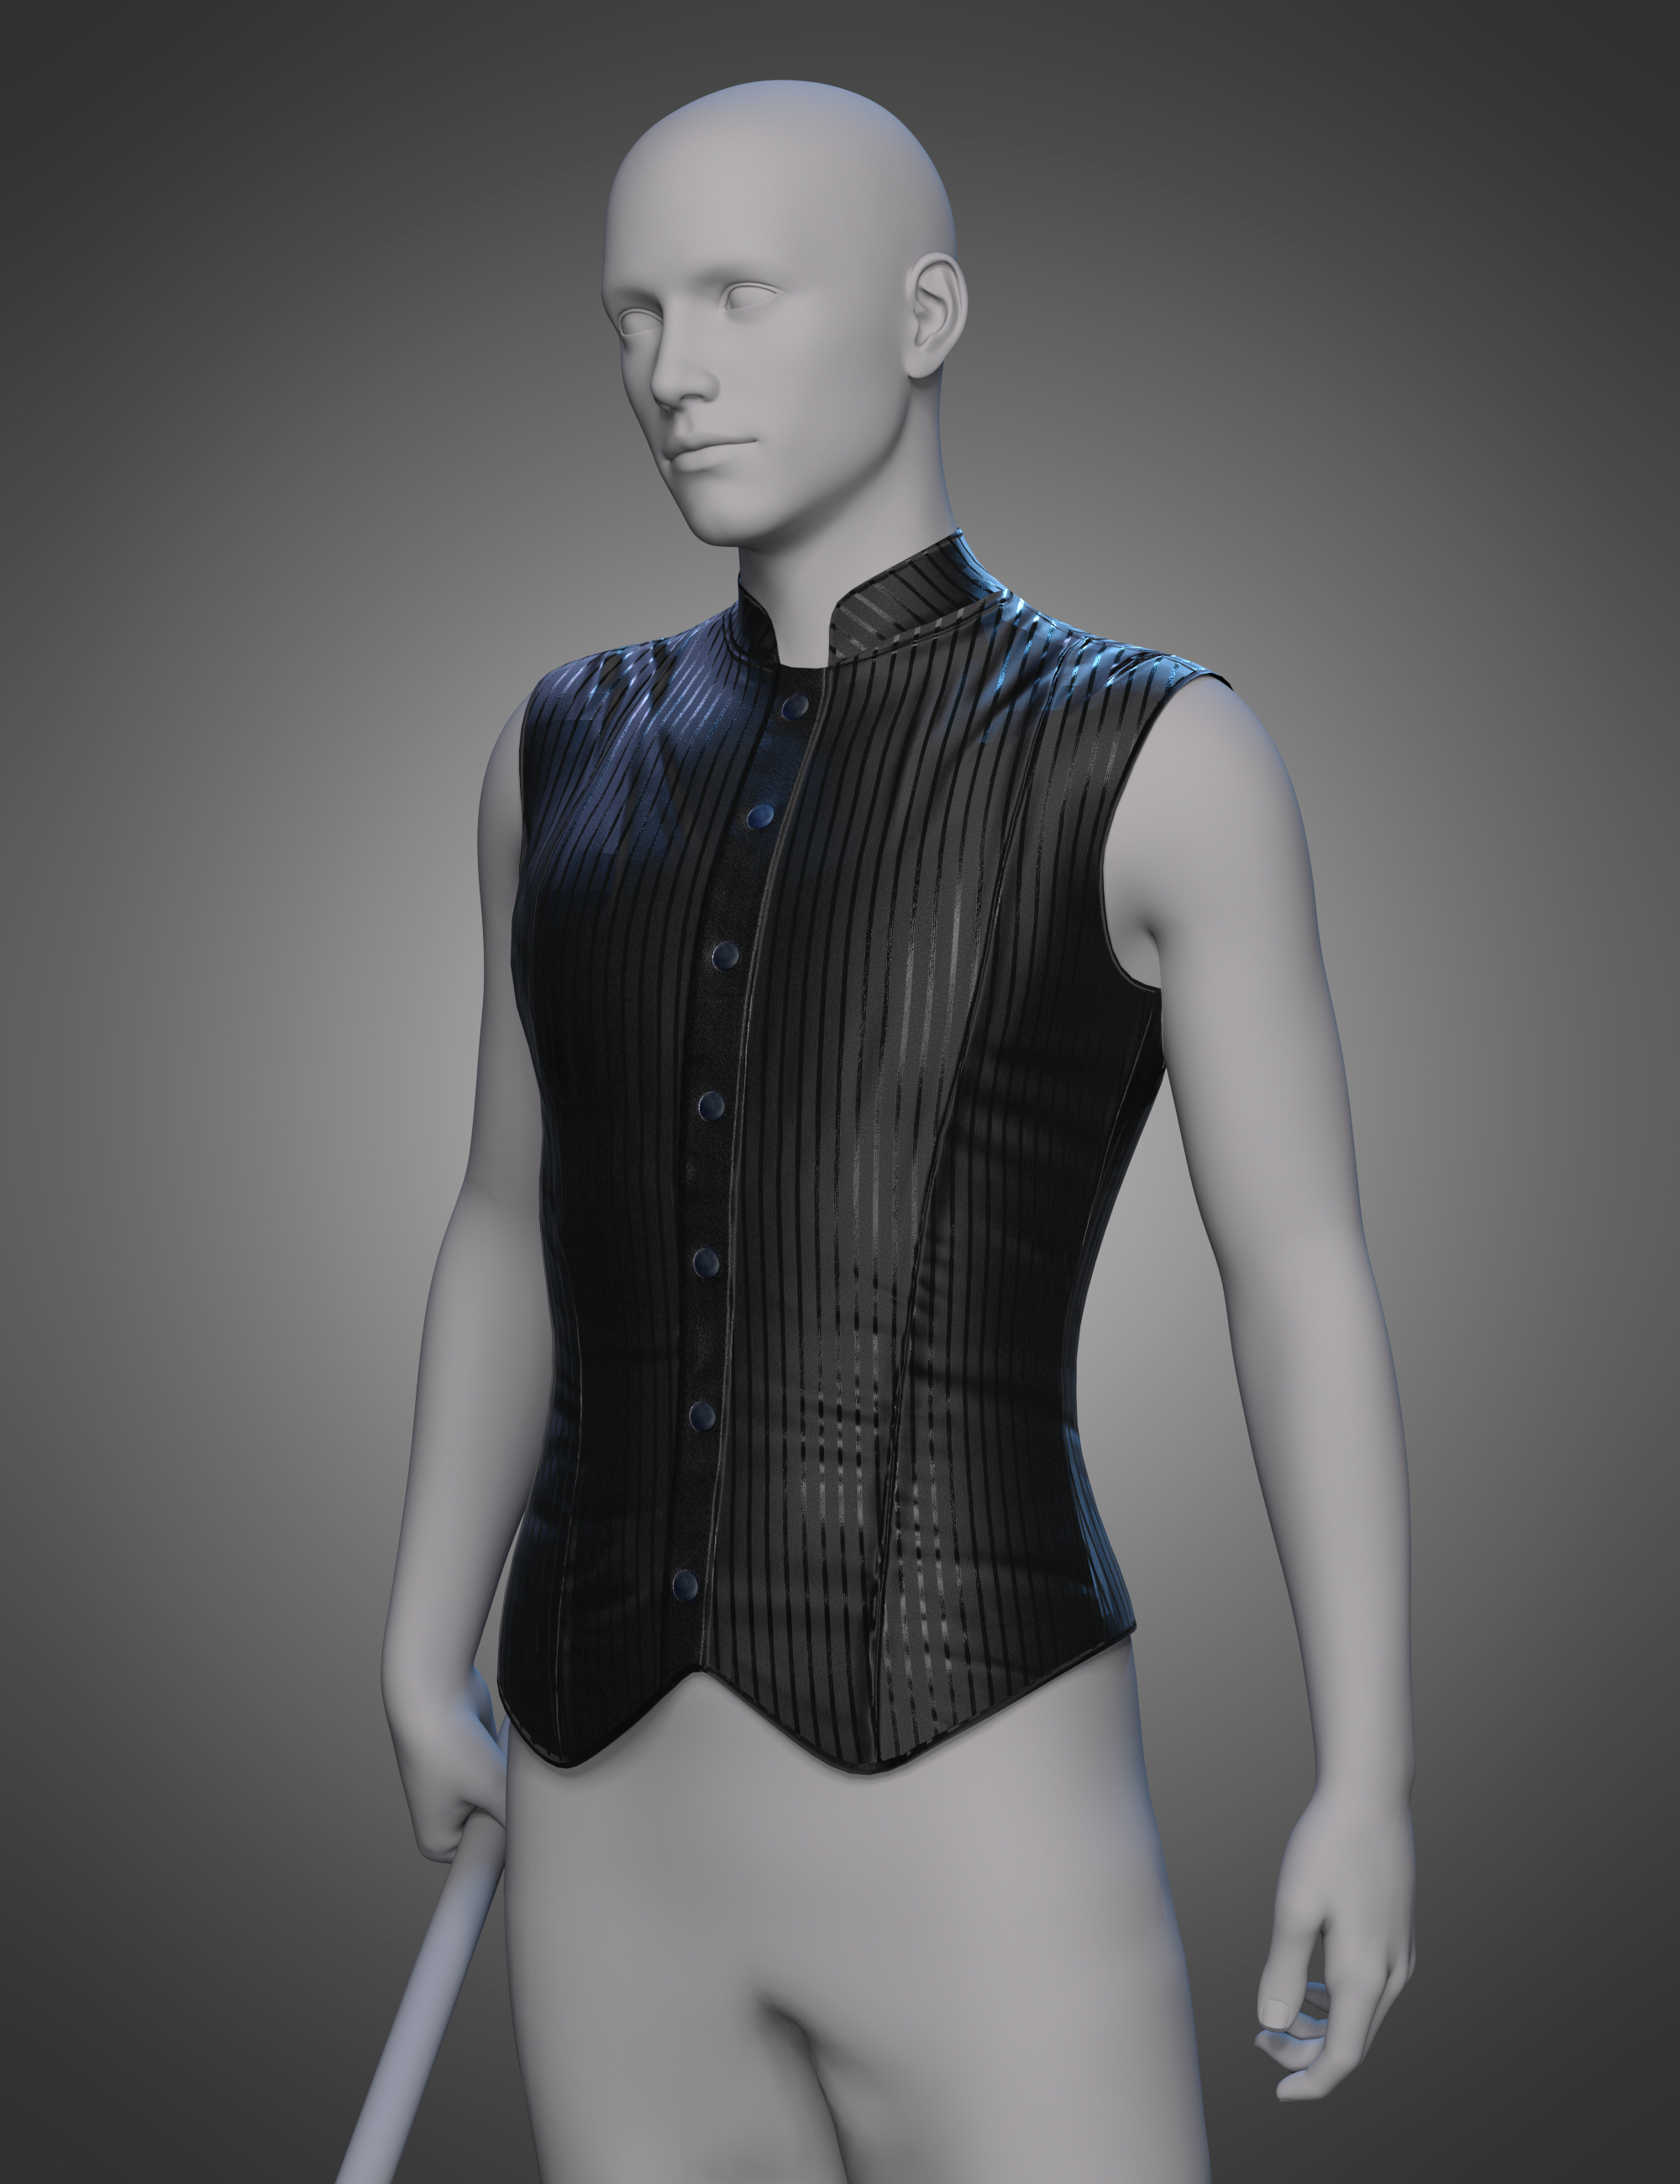 Victorian Vampire Top for Genesis 8 and 8.1 Males